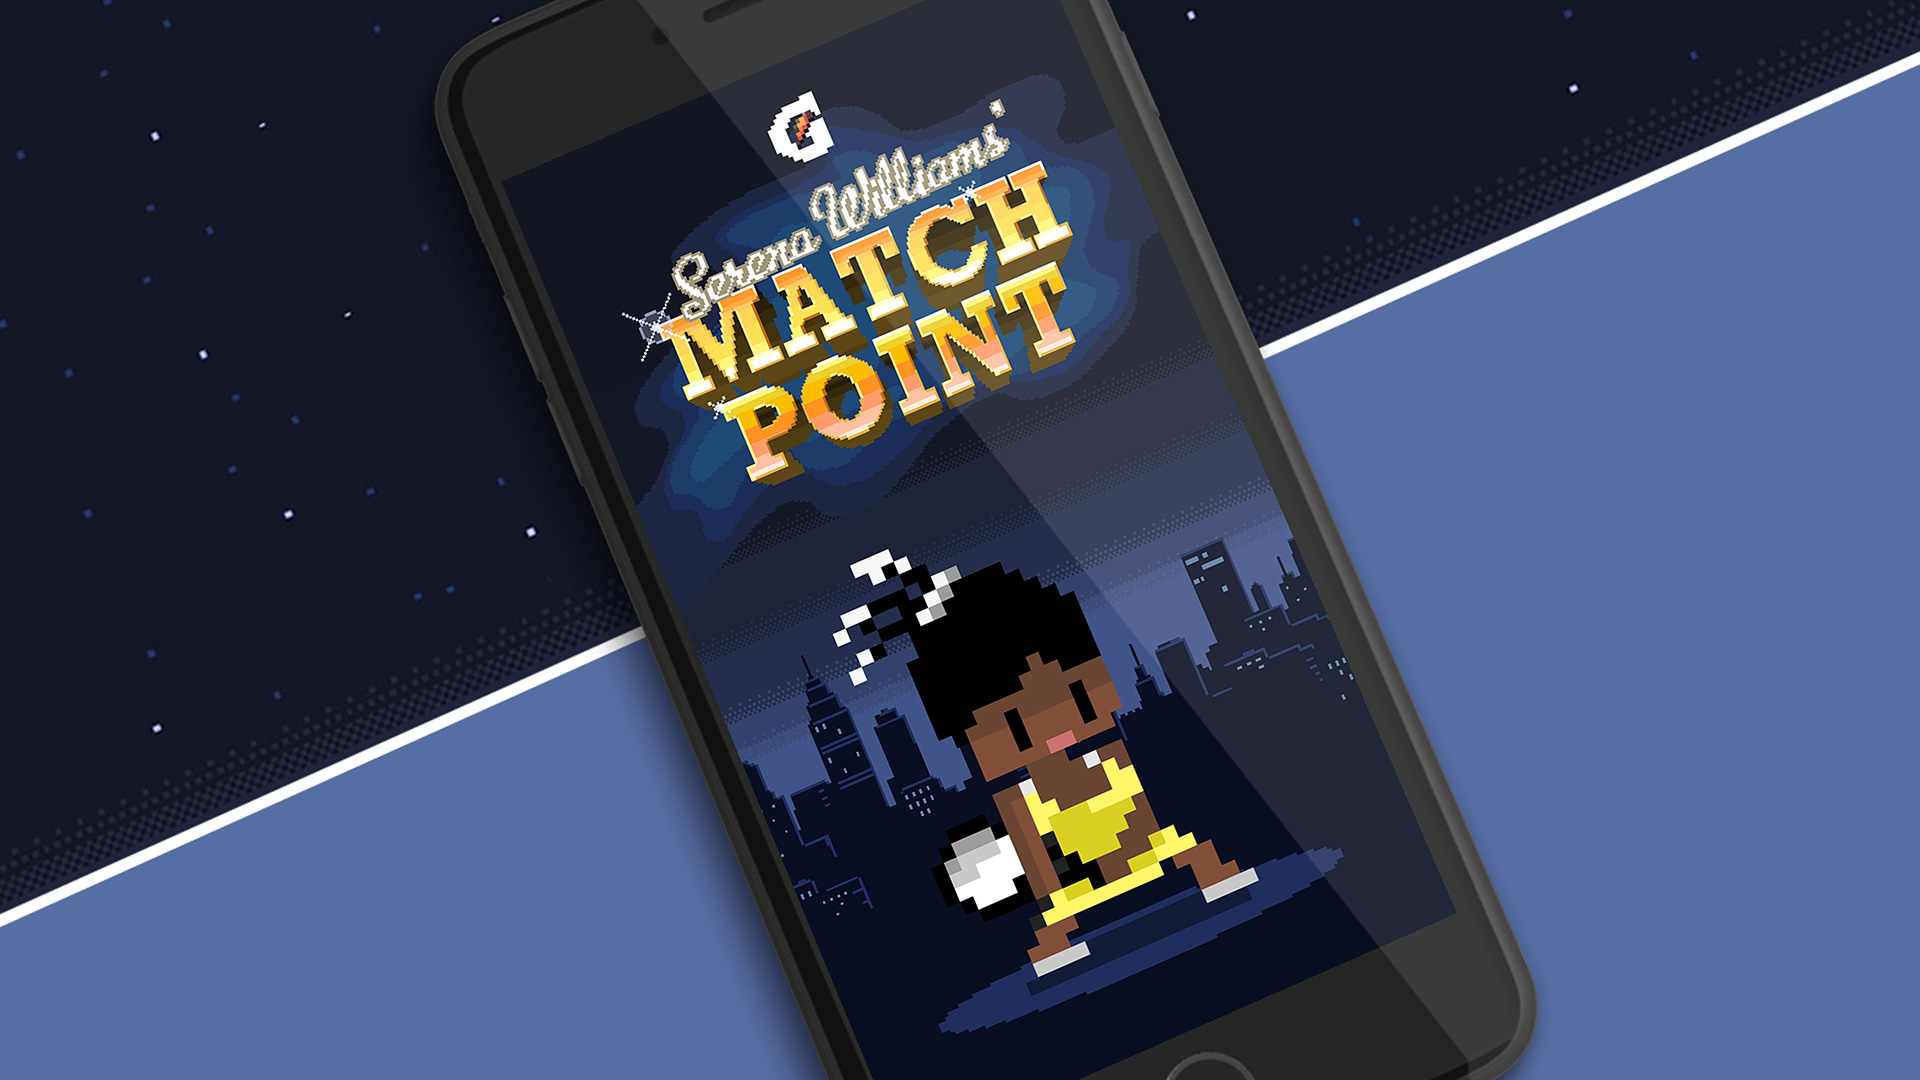 Serena Williams' Match Point - Smartphone , HD Wallpaper & Backgrounds